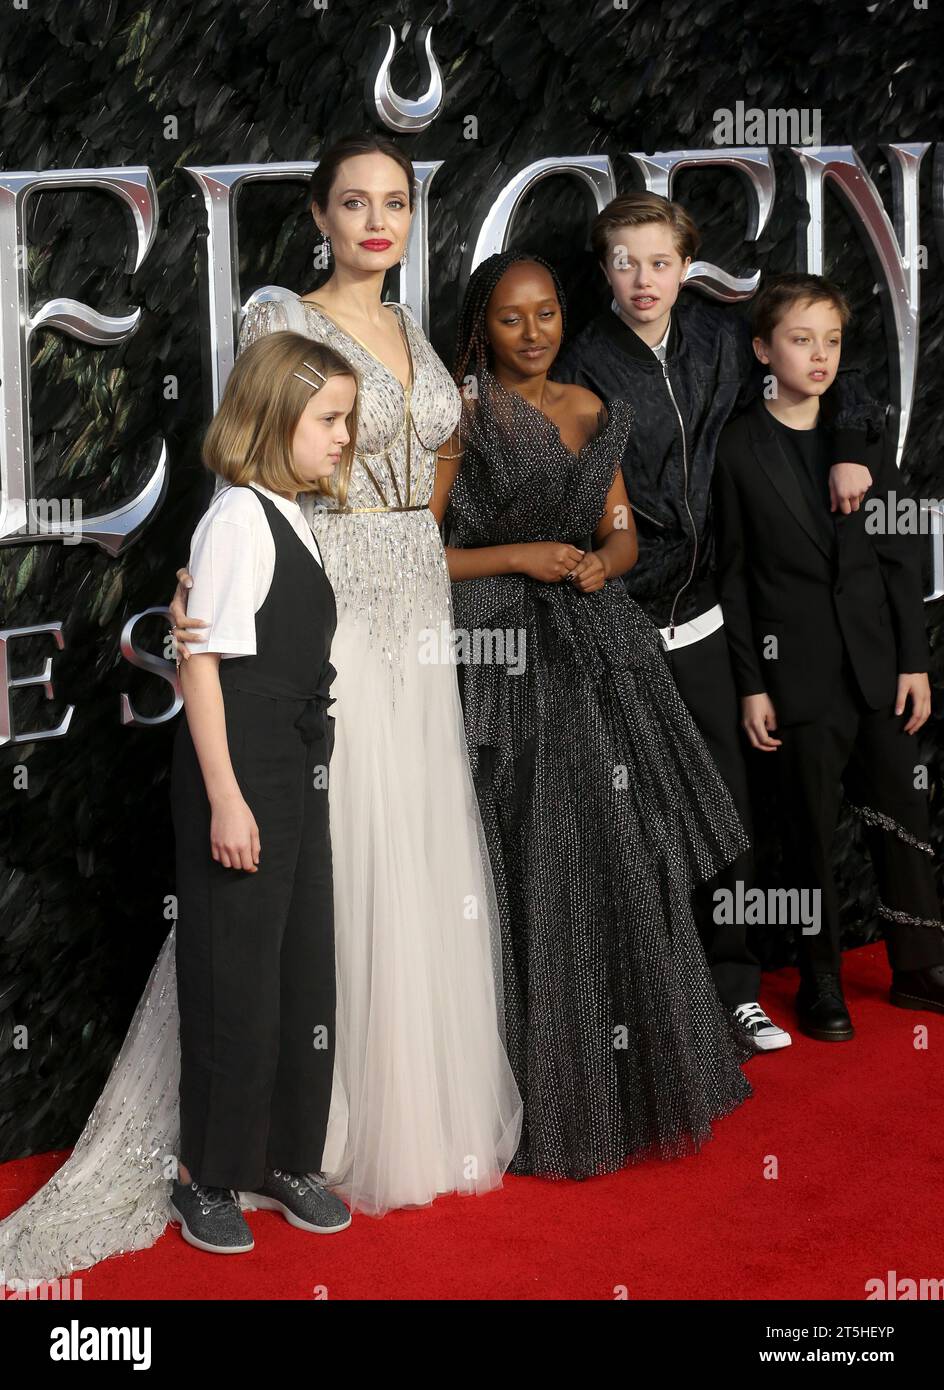 London, UK. 09th Oct, 2019. Vivienne Marcheline Jolie-Pitt, Angelina Jolie, Zahara Marley Jolie-Pitt, Shiloh Nouvel Jolie-Pitt and Knox Jolie-Pitt attend the European premiere of 'Maleficent: Mistress of Evil' at Odeon IMAX Waterloo in London. (Photo by Fred Duval/SOPA Images/Sipa USA) Credit: Sipa USA/Alamy Live News Stock Photo